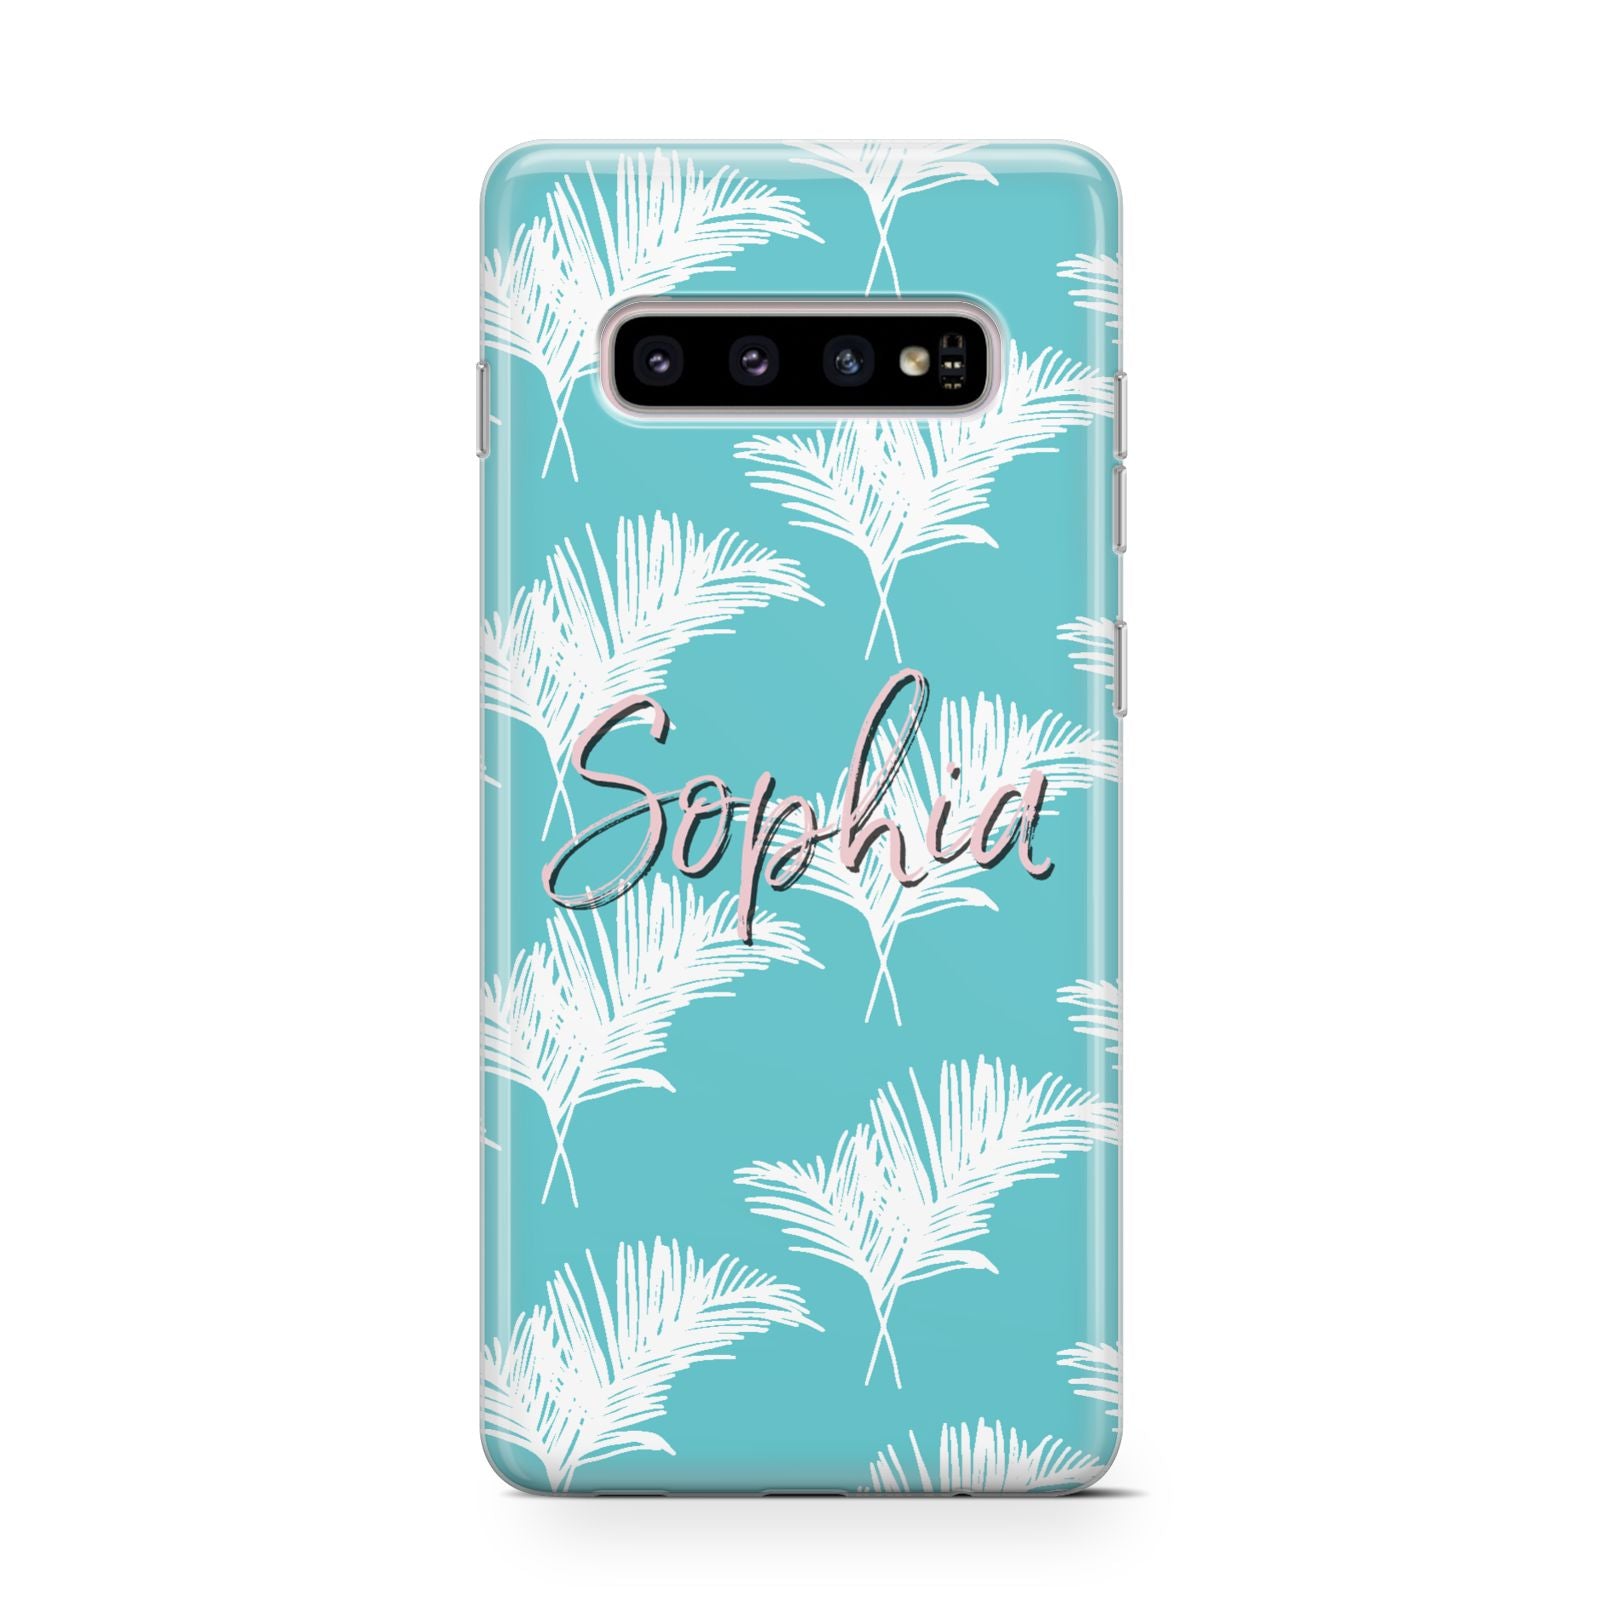 Personalised Blue White Tropical Foliage Samsung Galaxy S10 Case